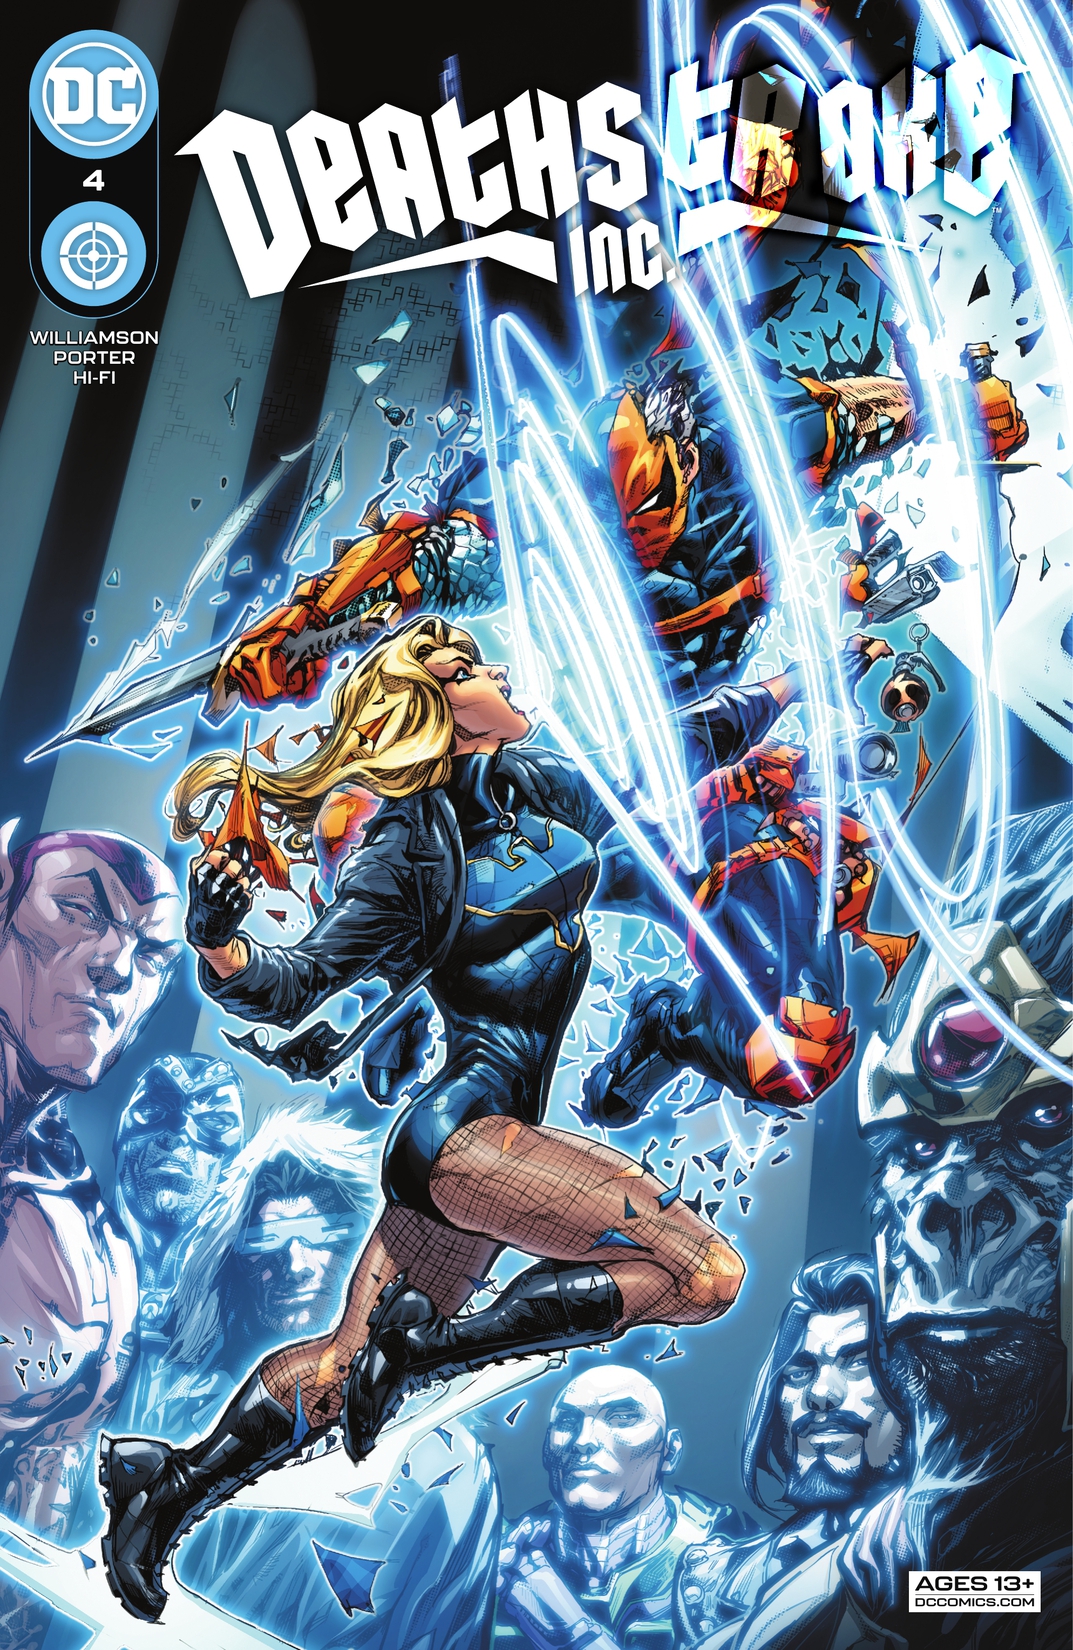 Deathstroke Inc. #4 preview images